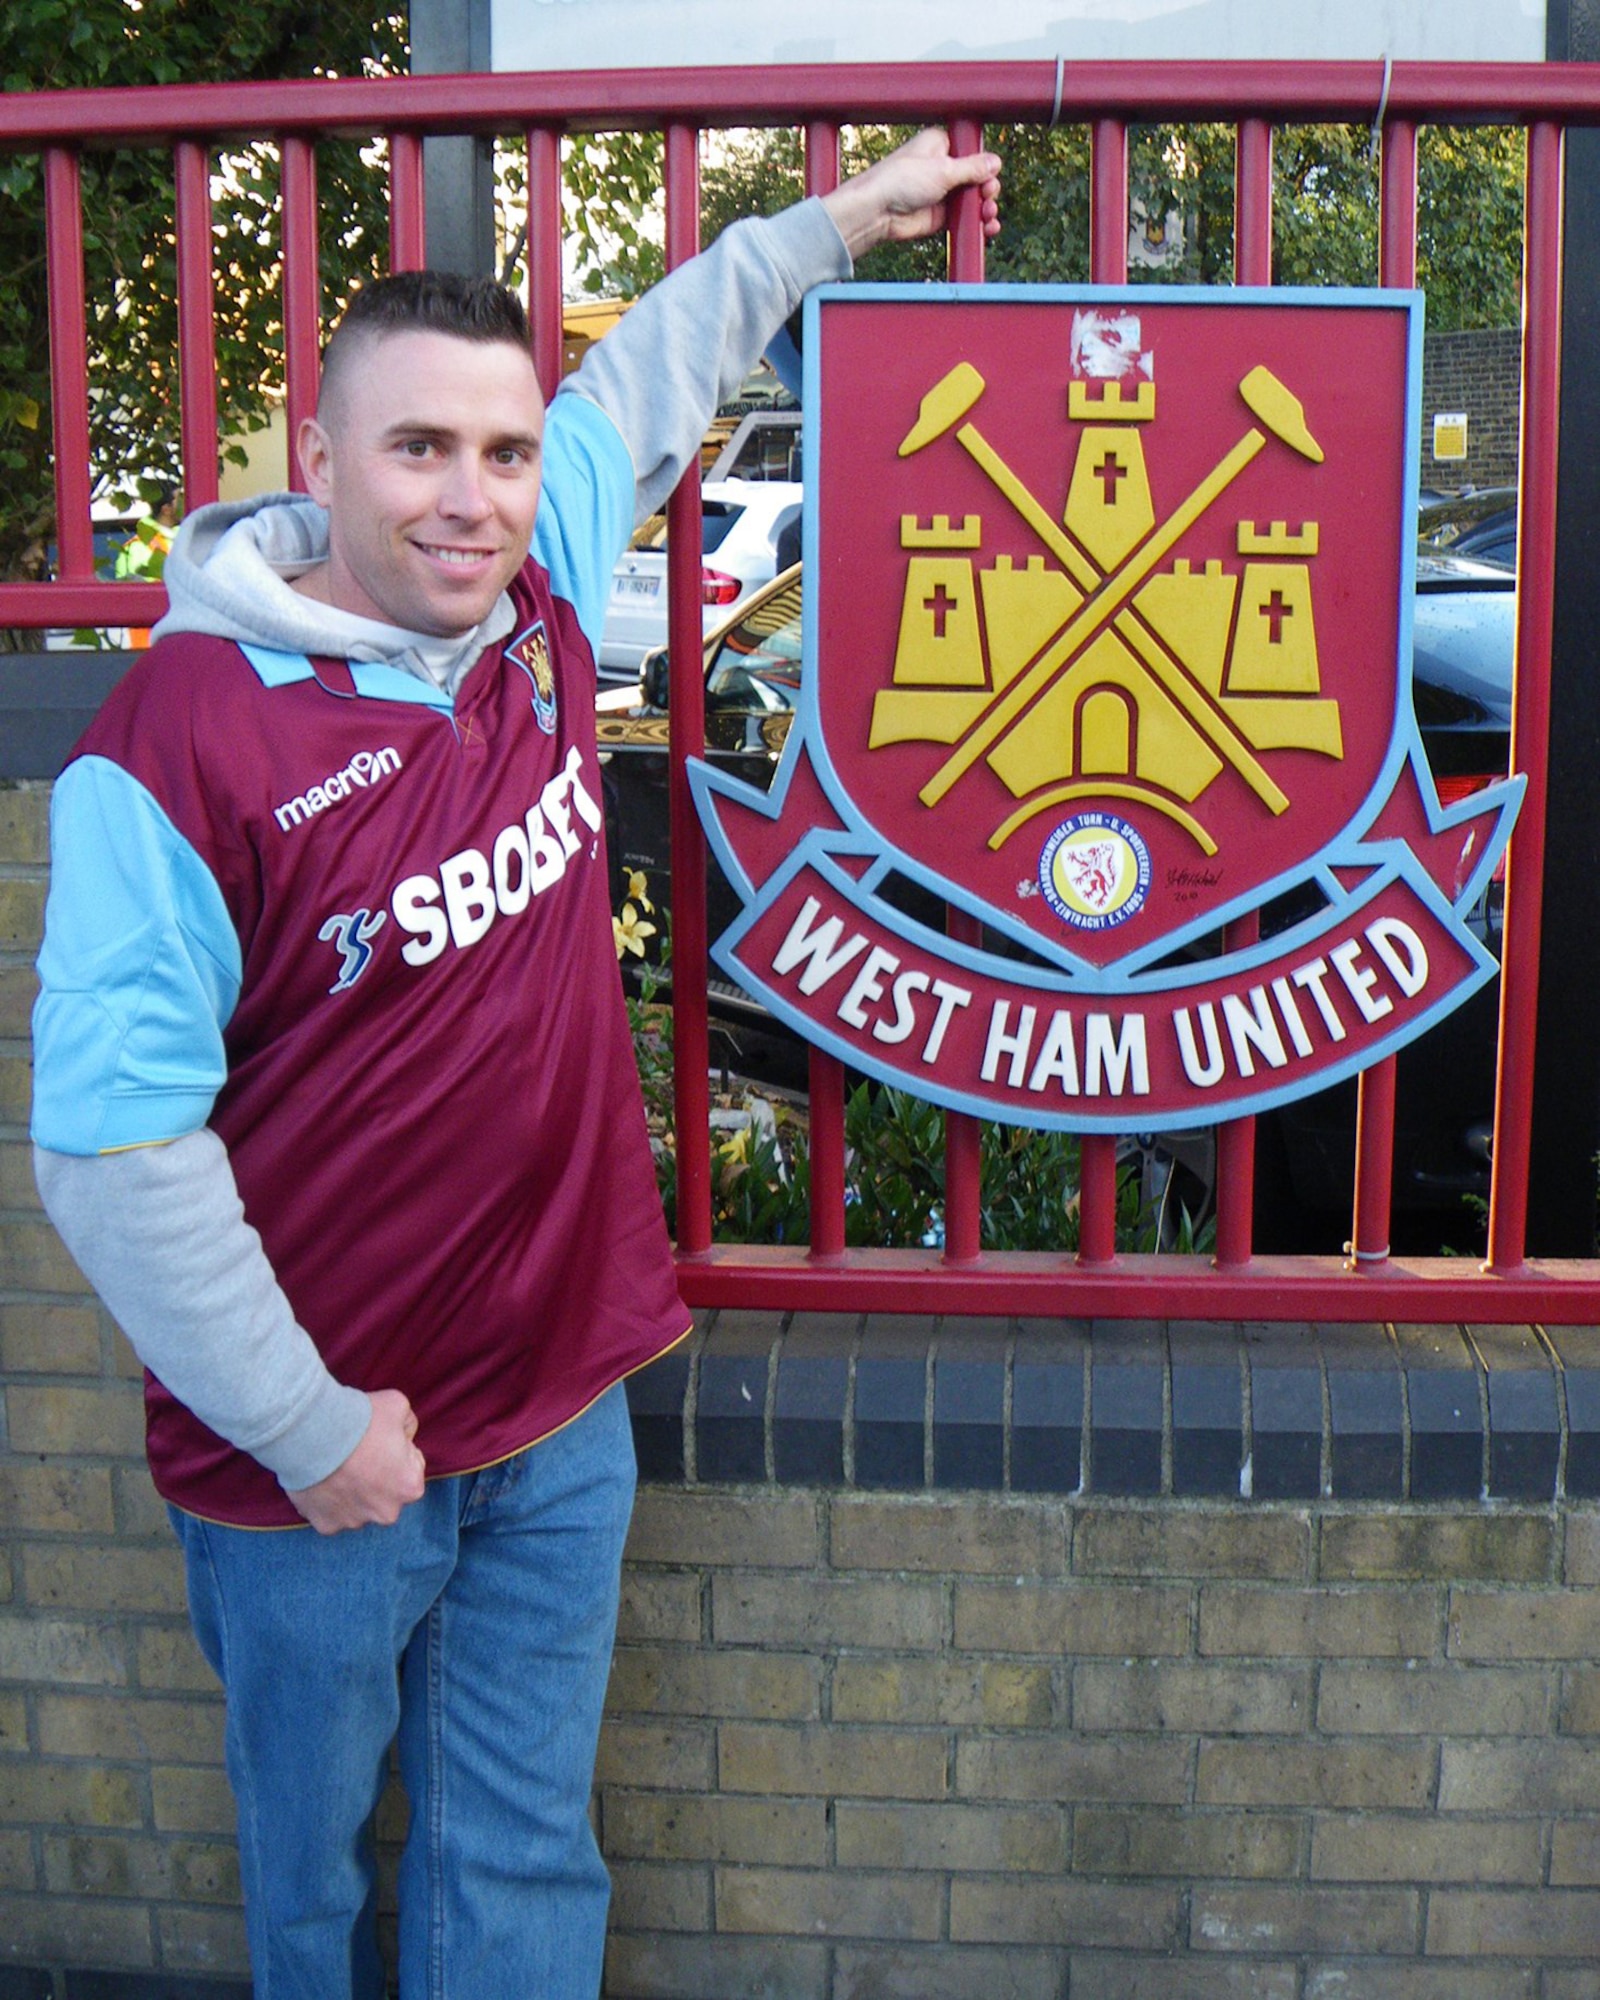 Tech. Sgt. Kevin Wallace, 100th Air Refueling Wing public affairs, stands at the gate of Boleyn Ground in Upton Park, London, home to the West Ham United Football Club Oct 24, 2010. It was the American servicemember's first English soccer game. (U.S. Air Force photo/Danny Reed)